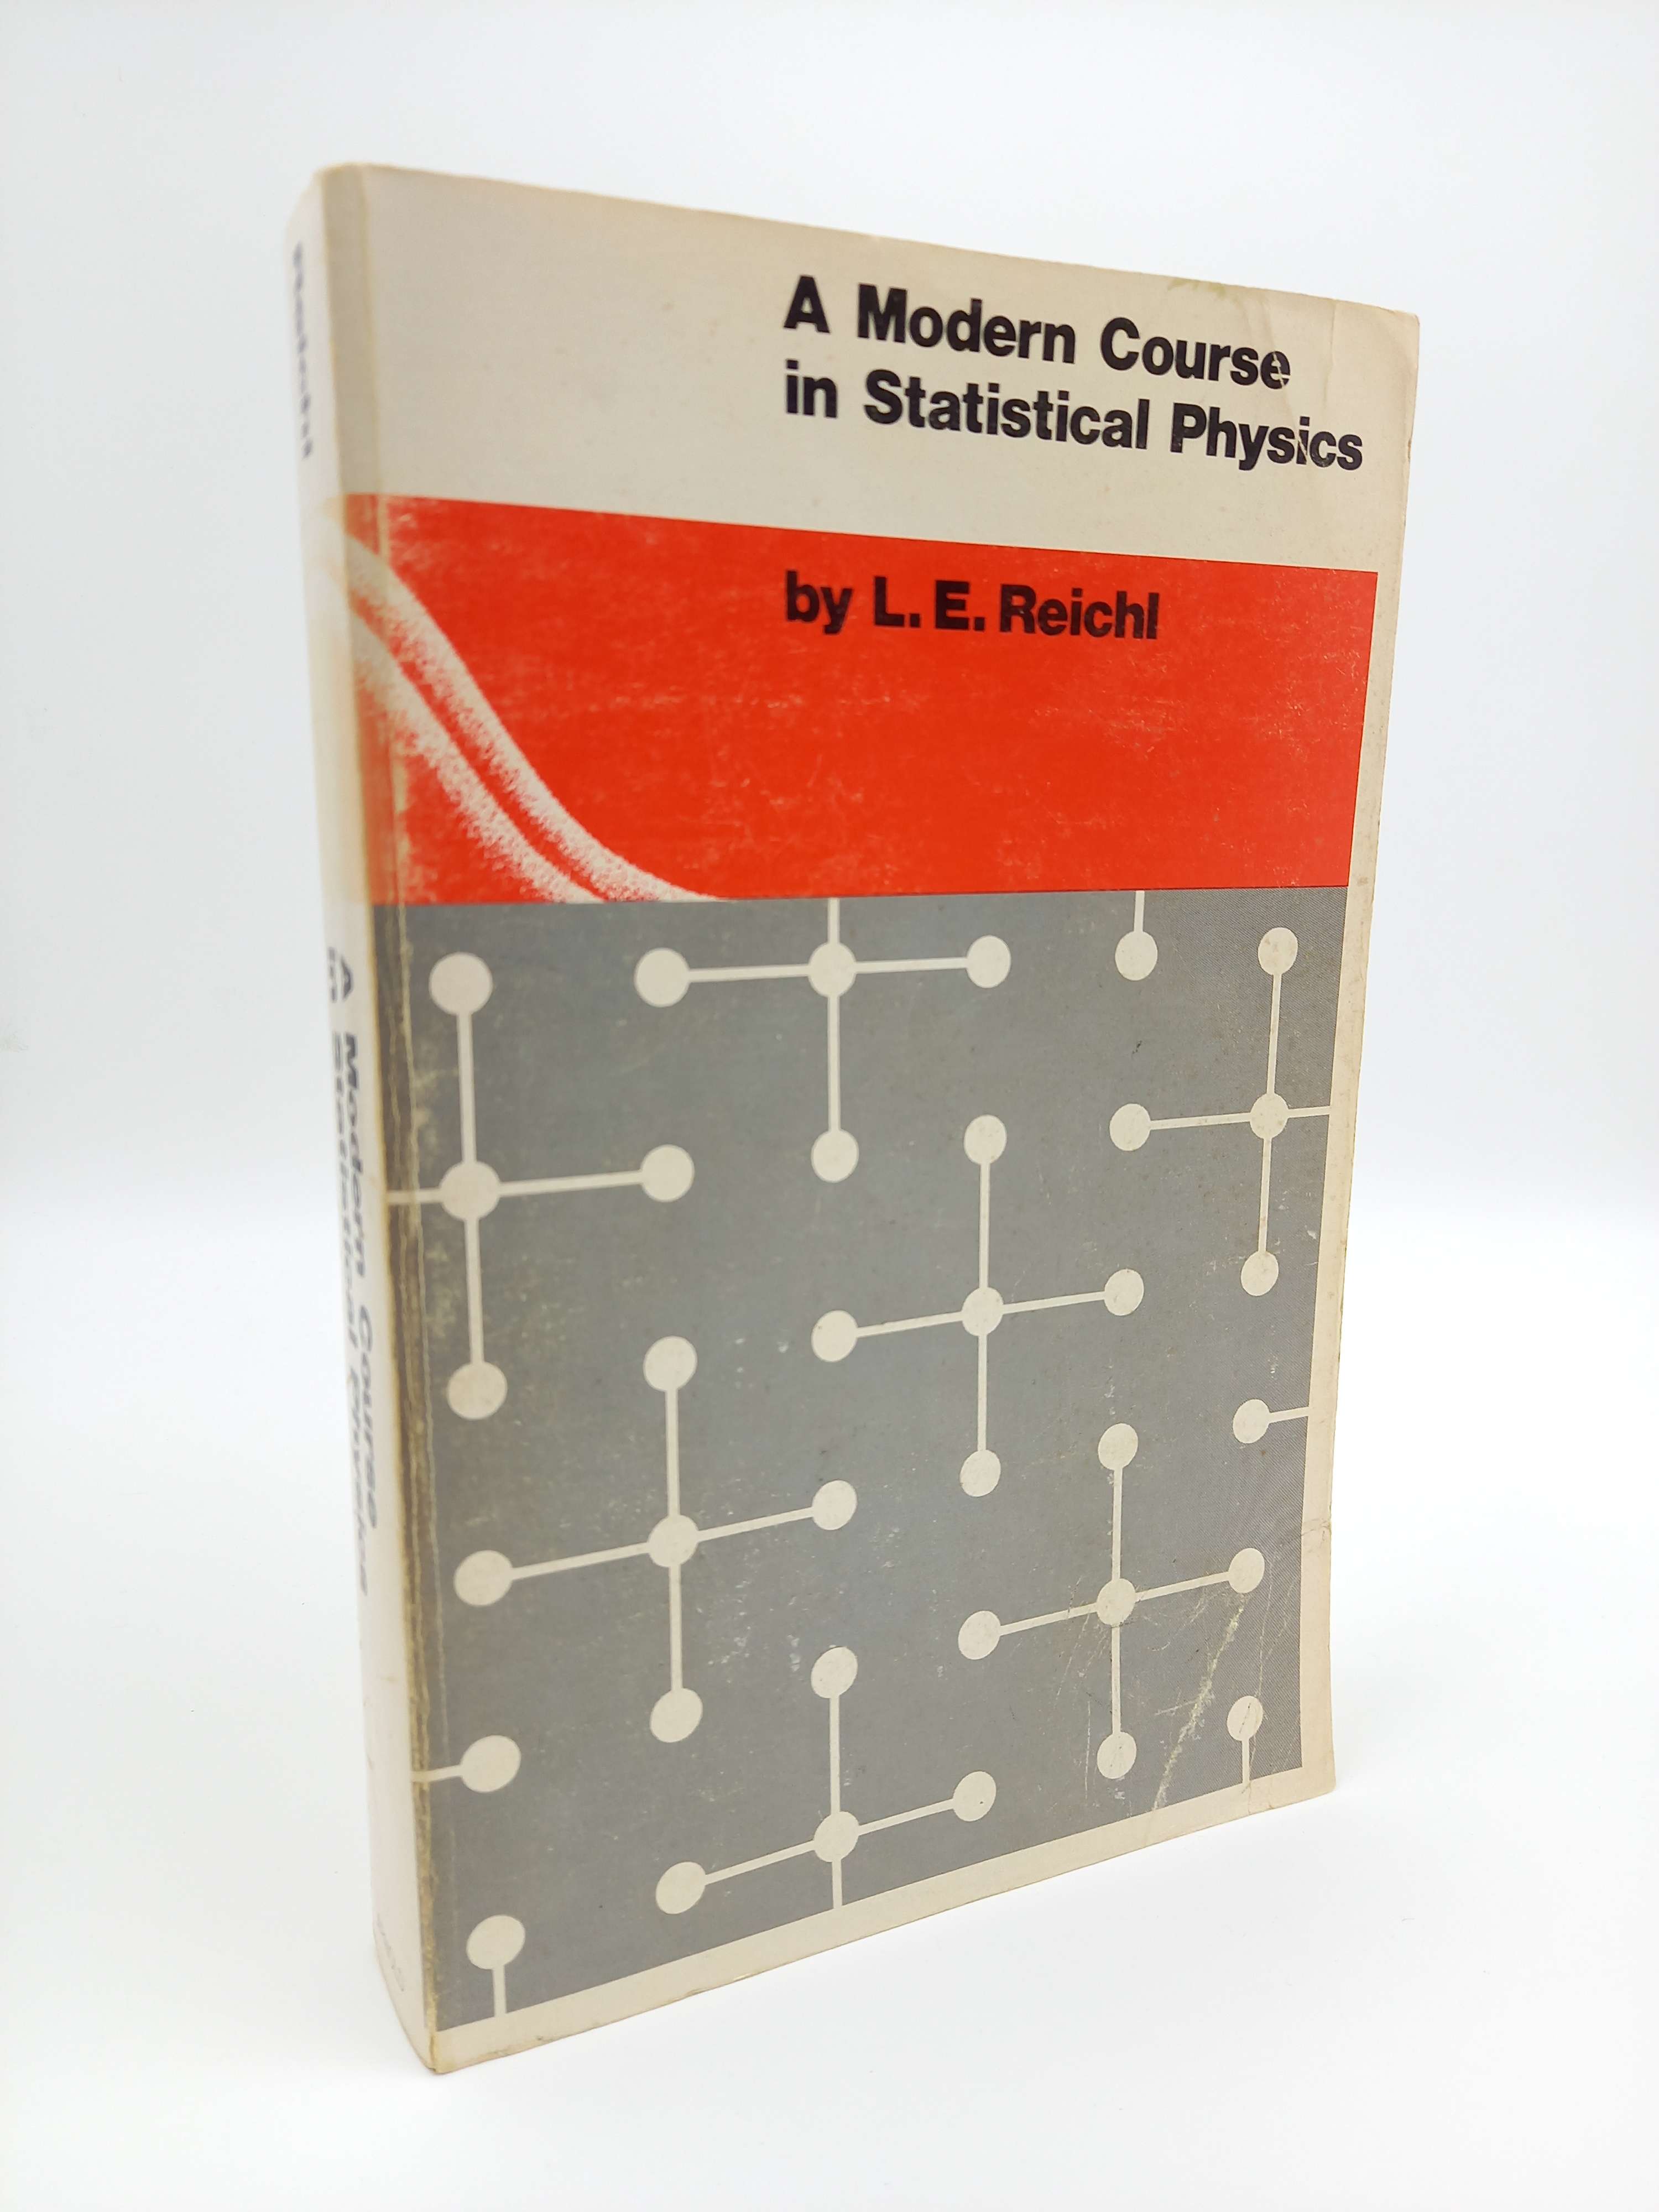 A Modern Course in Statistical Physics. (With a foreword by Ilya Prigogine) - Reichl, Linda E.